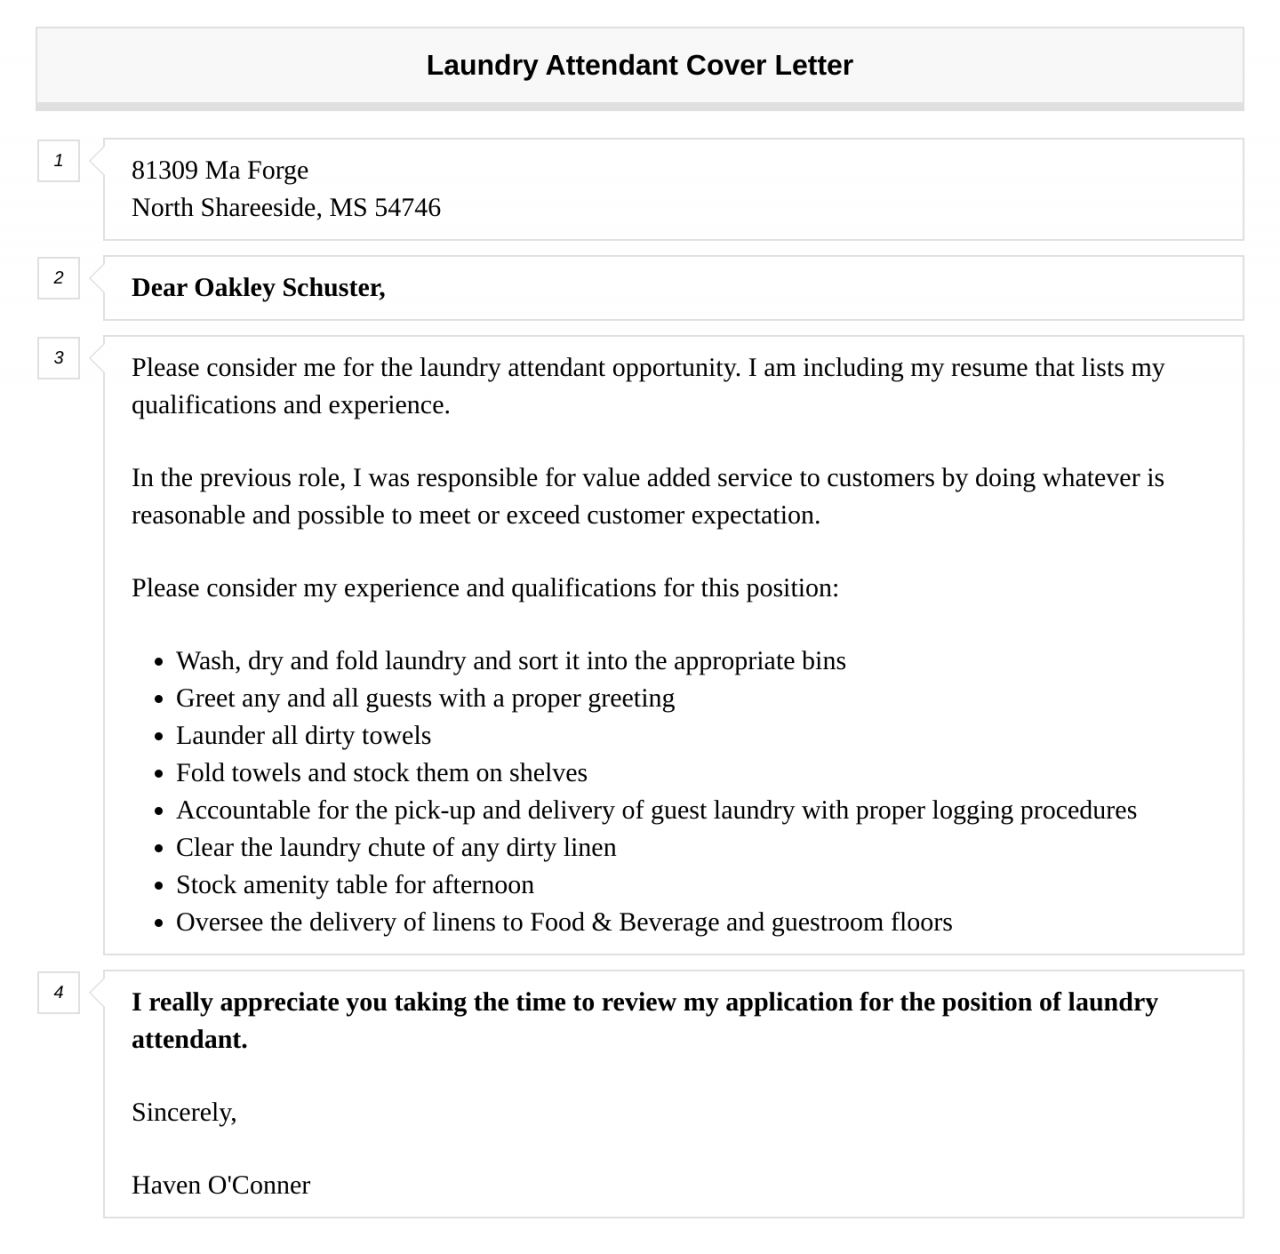 How to write an application letter for a laundry job